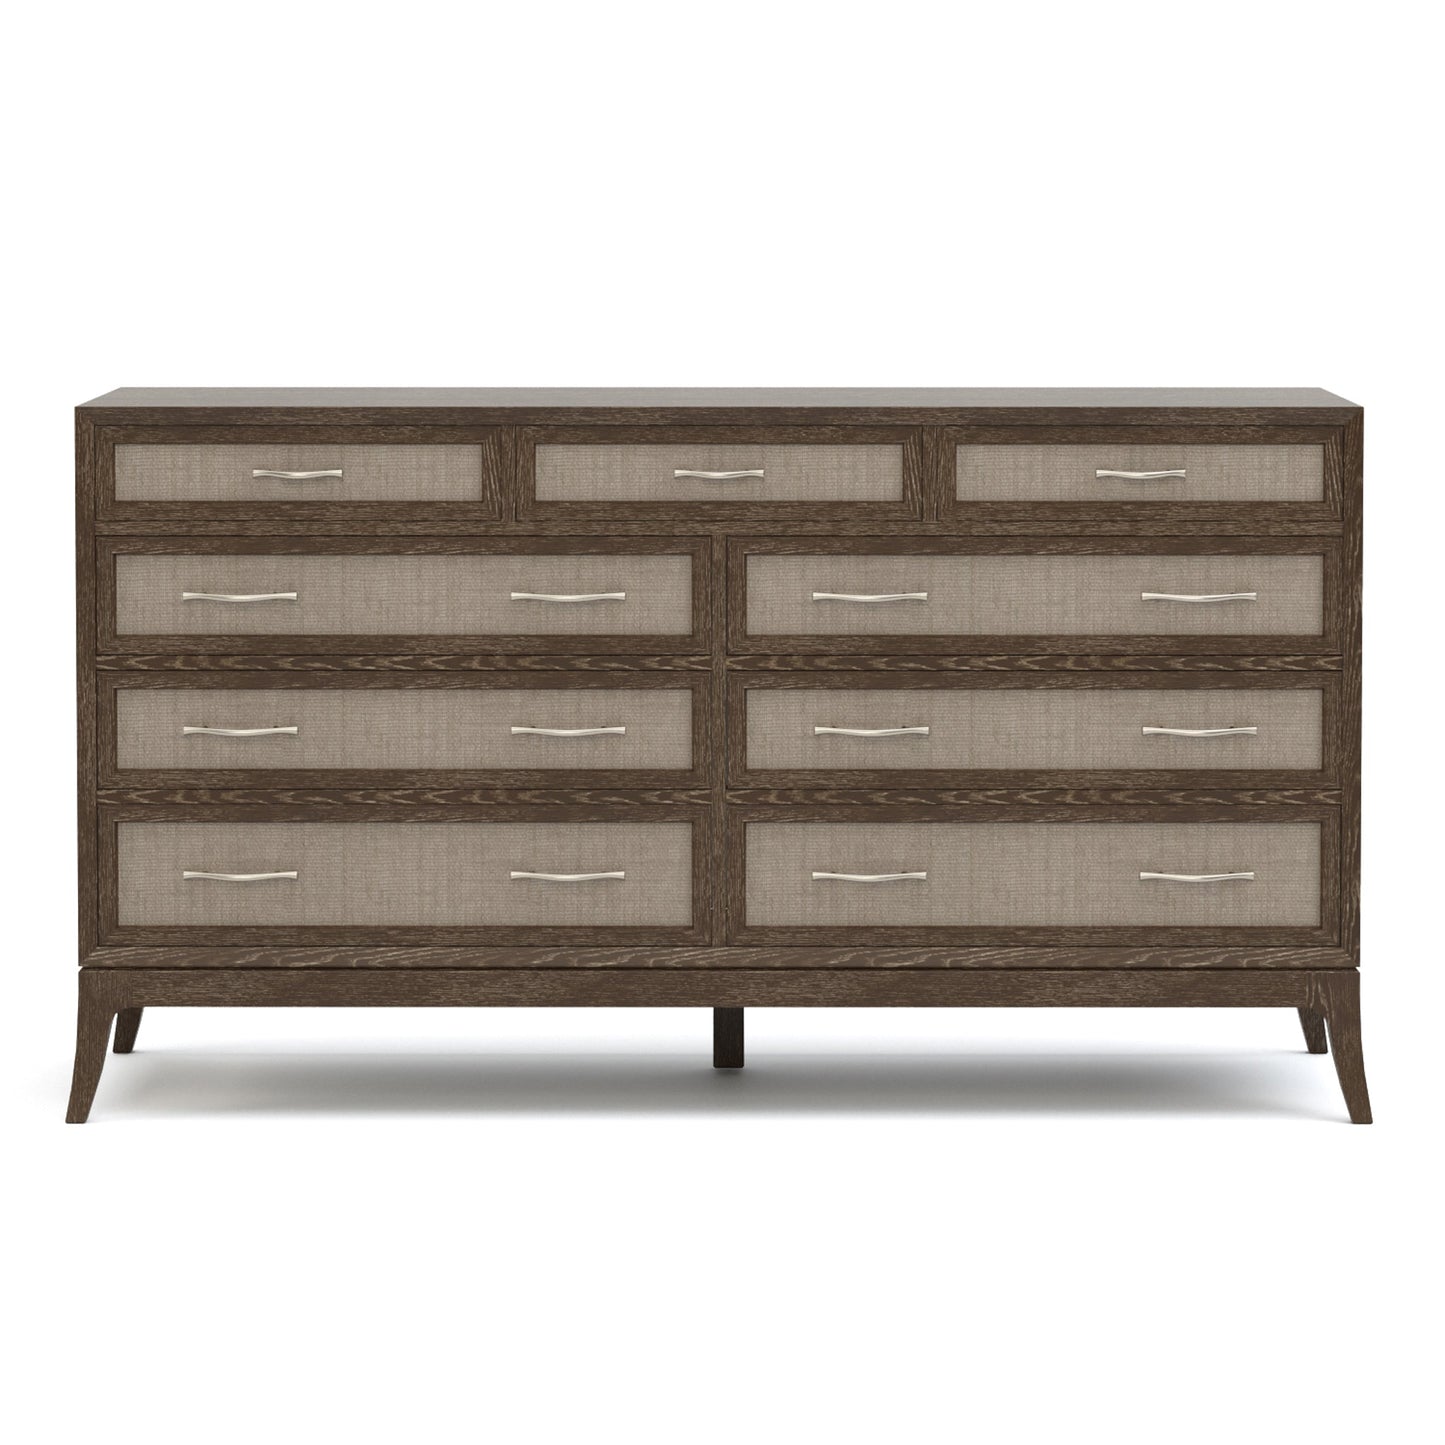 Maidstone Nine-Drawer Dresser with Woven Jute in 202 Pier finish